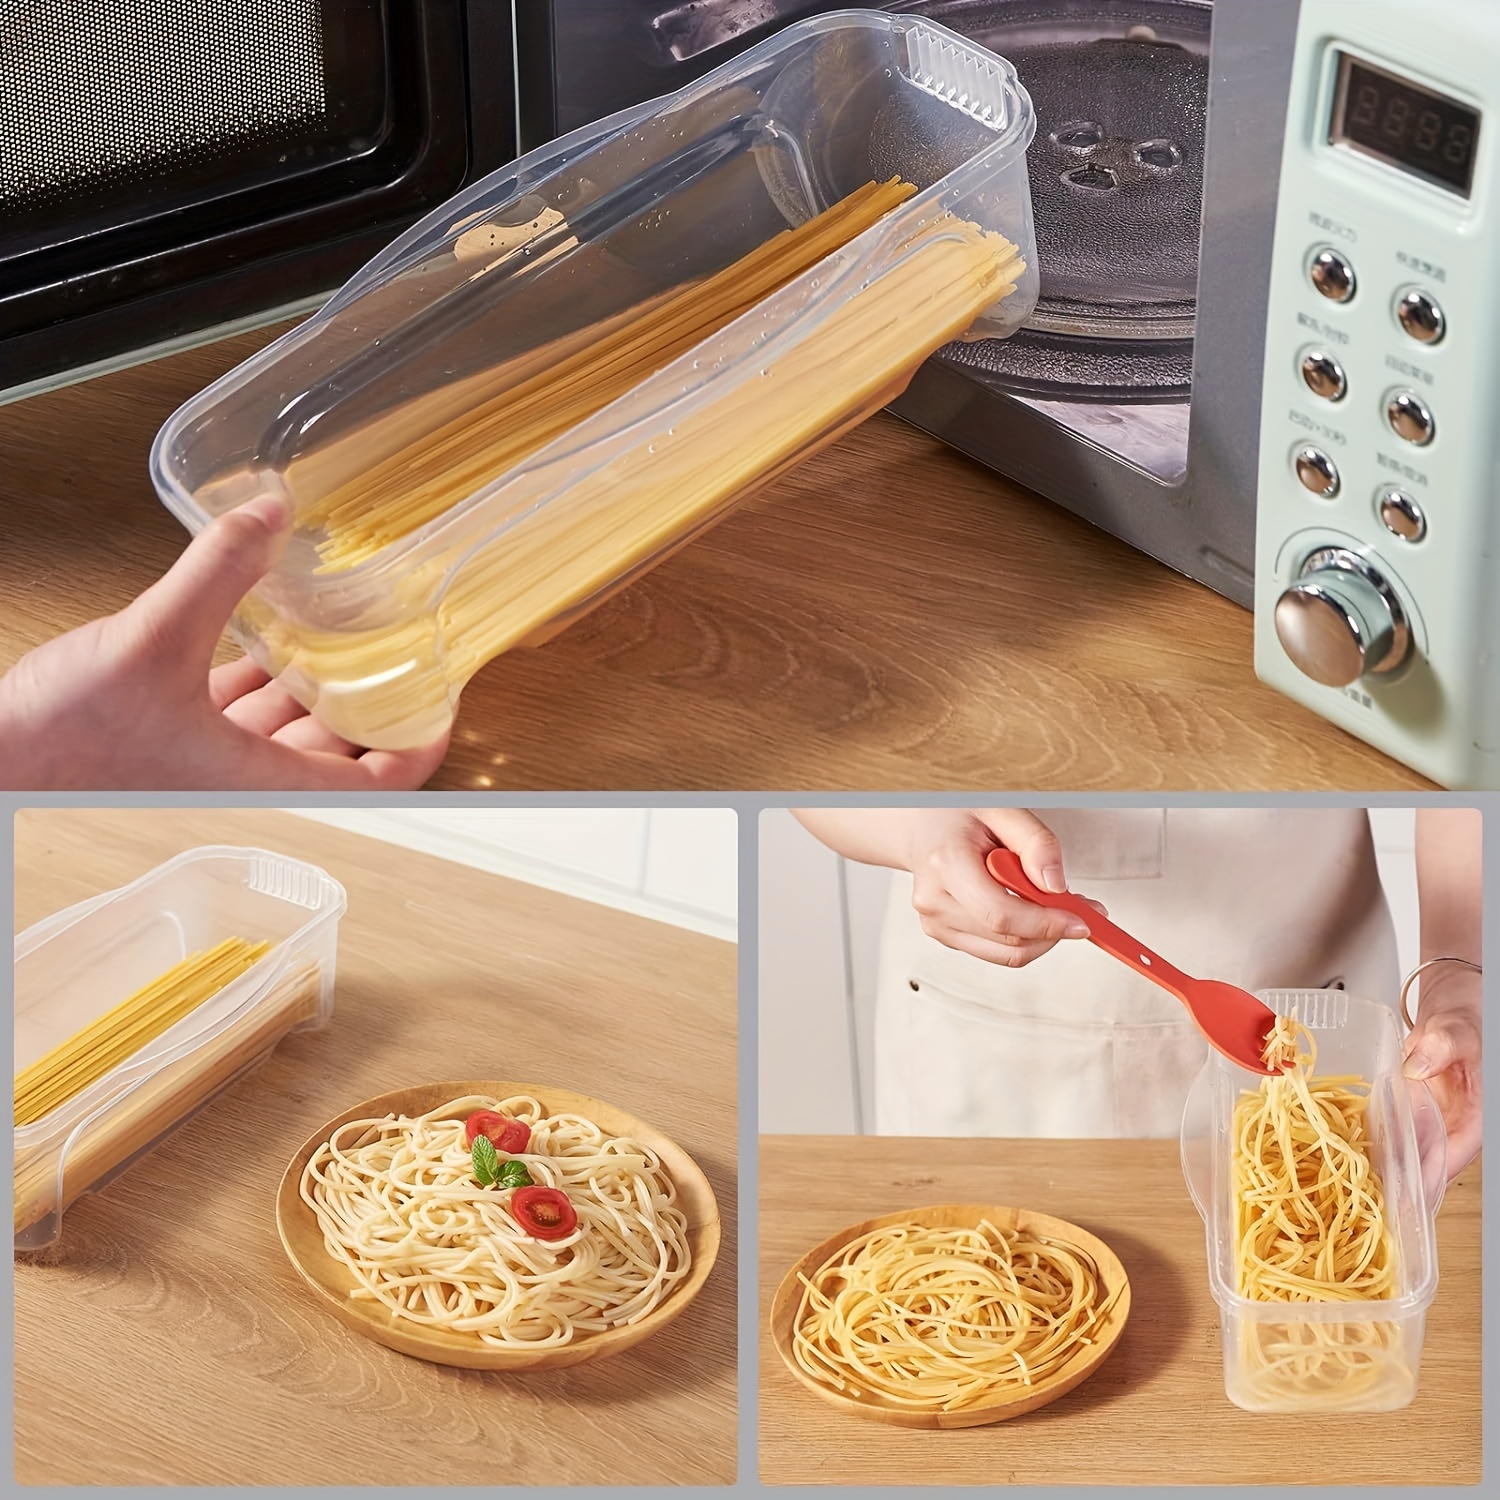 Microwave Pasta Cooker with Strainer Heat Resistant Pasta Steamer